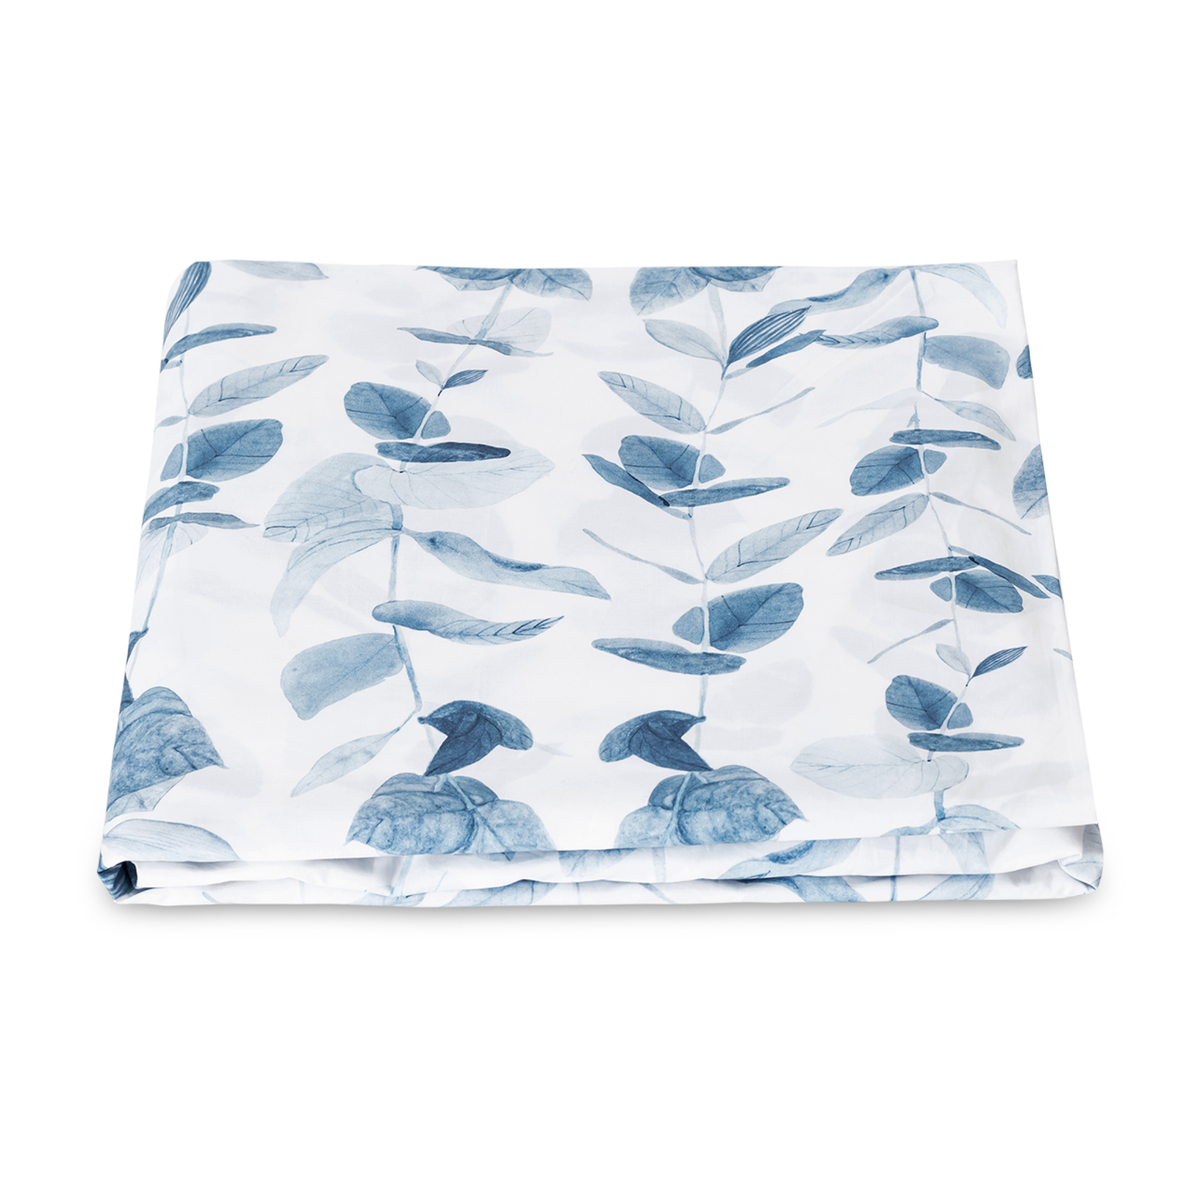 Folded Fitted Sheet of Matouk Schumacher Antonia Bedding in Hazy Blue Color